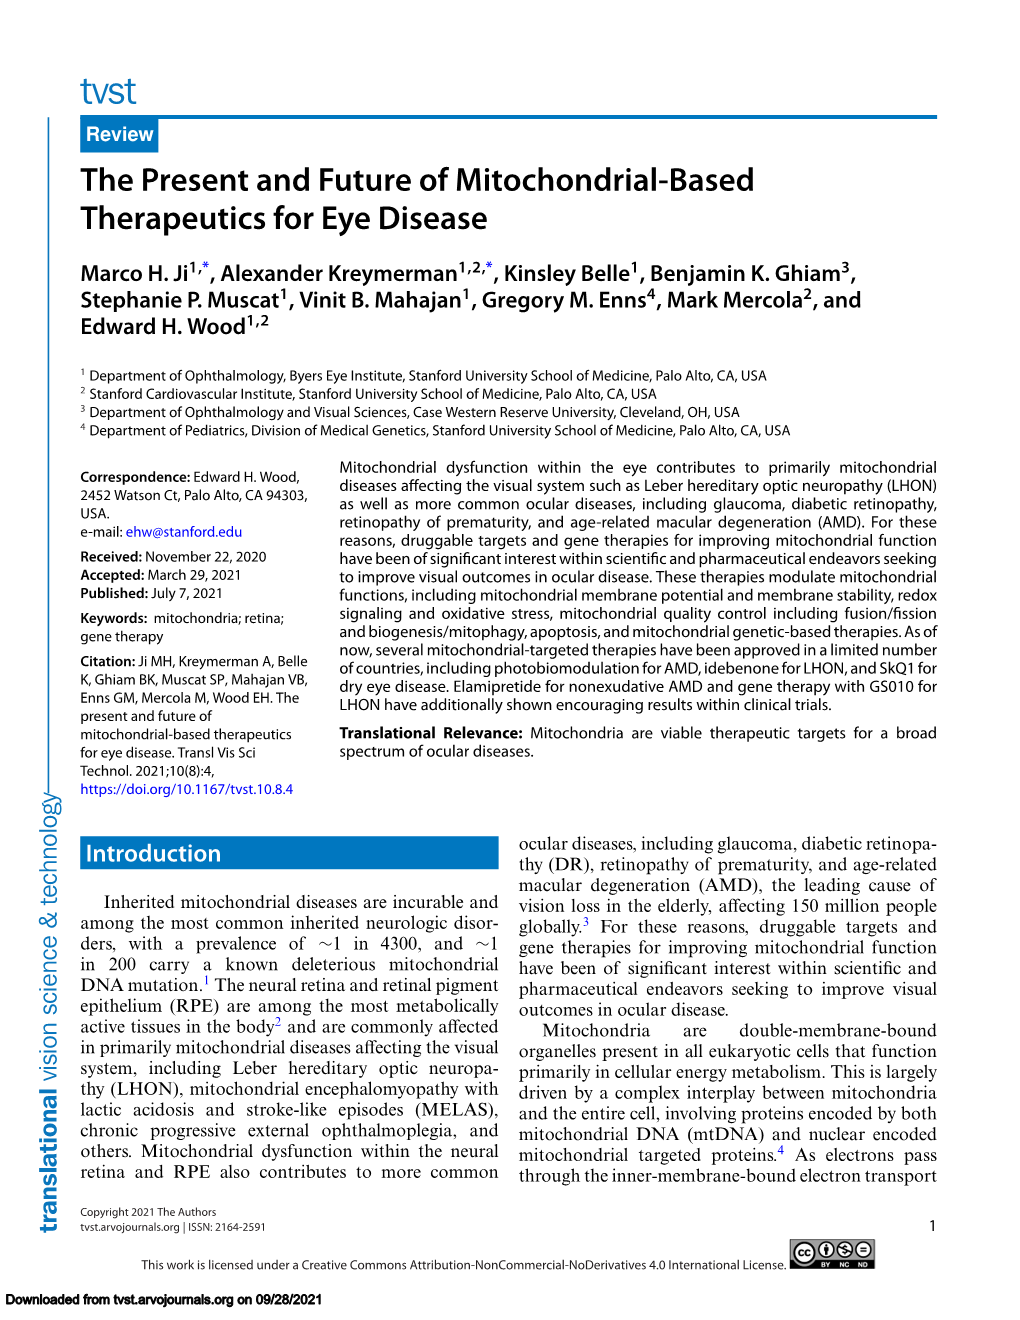 The Present and Future of Mitochondrial-Based Therapeutics for Eye Disease